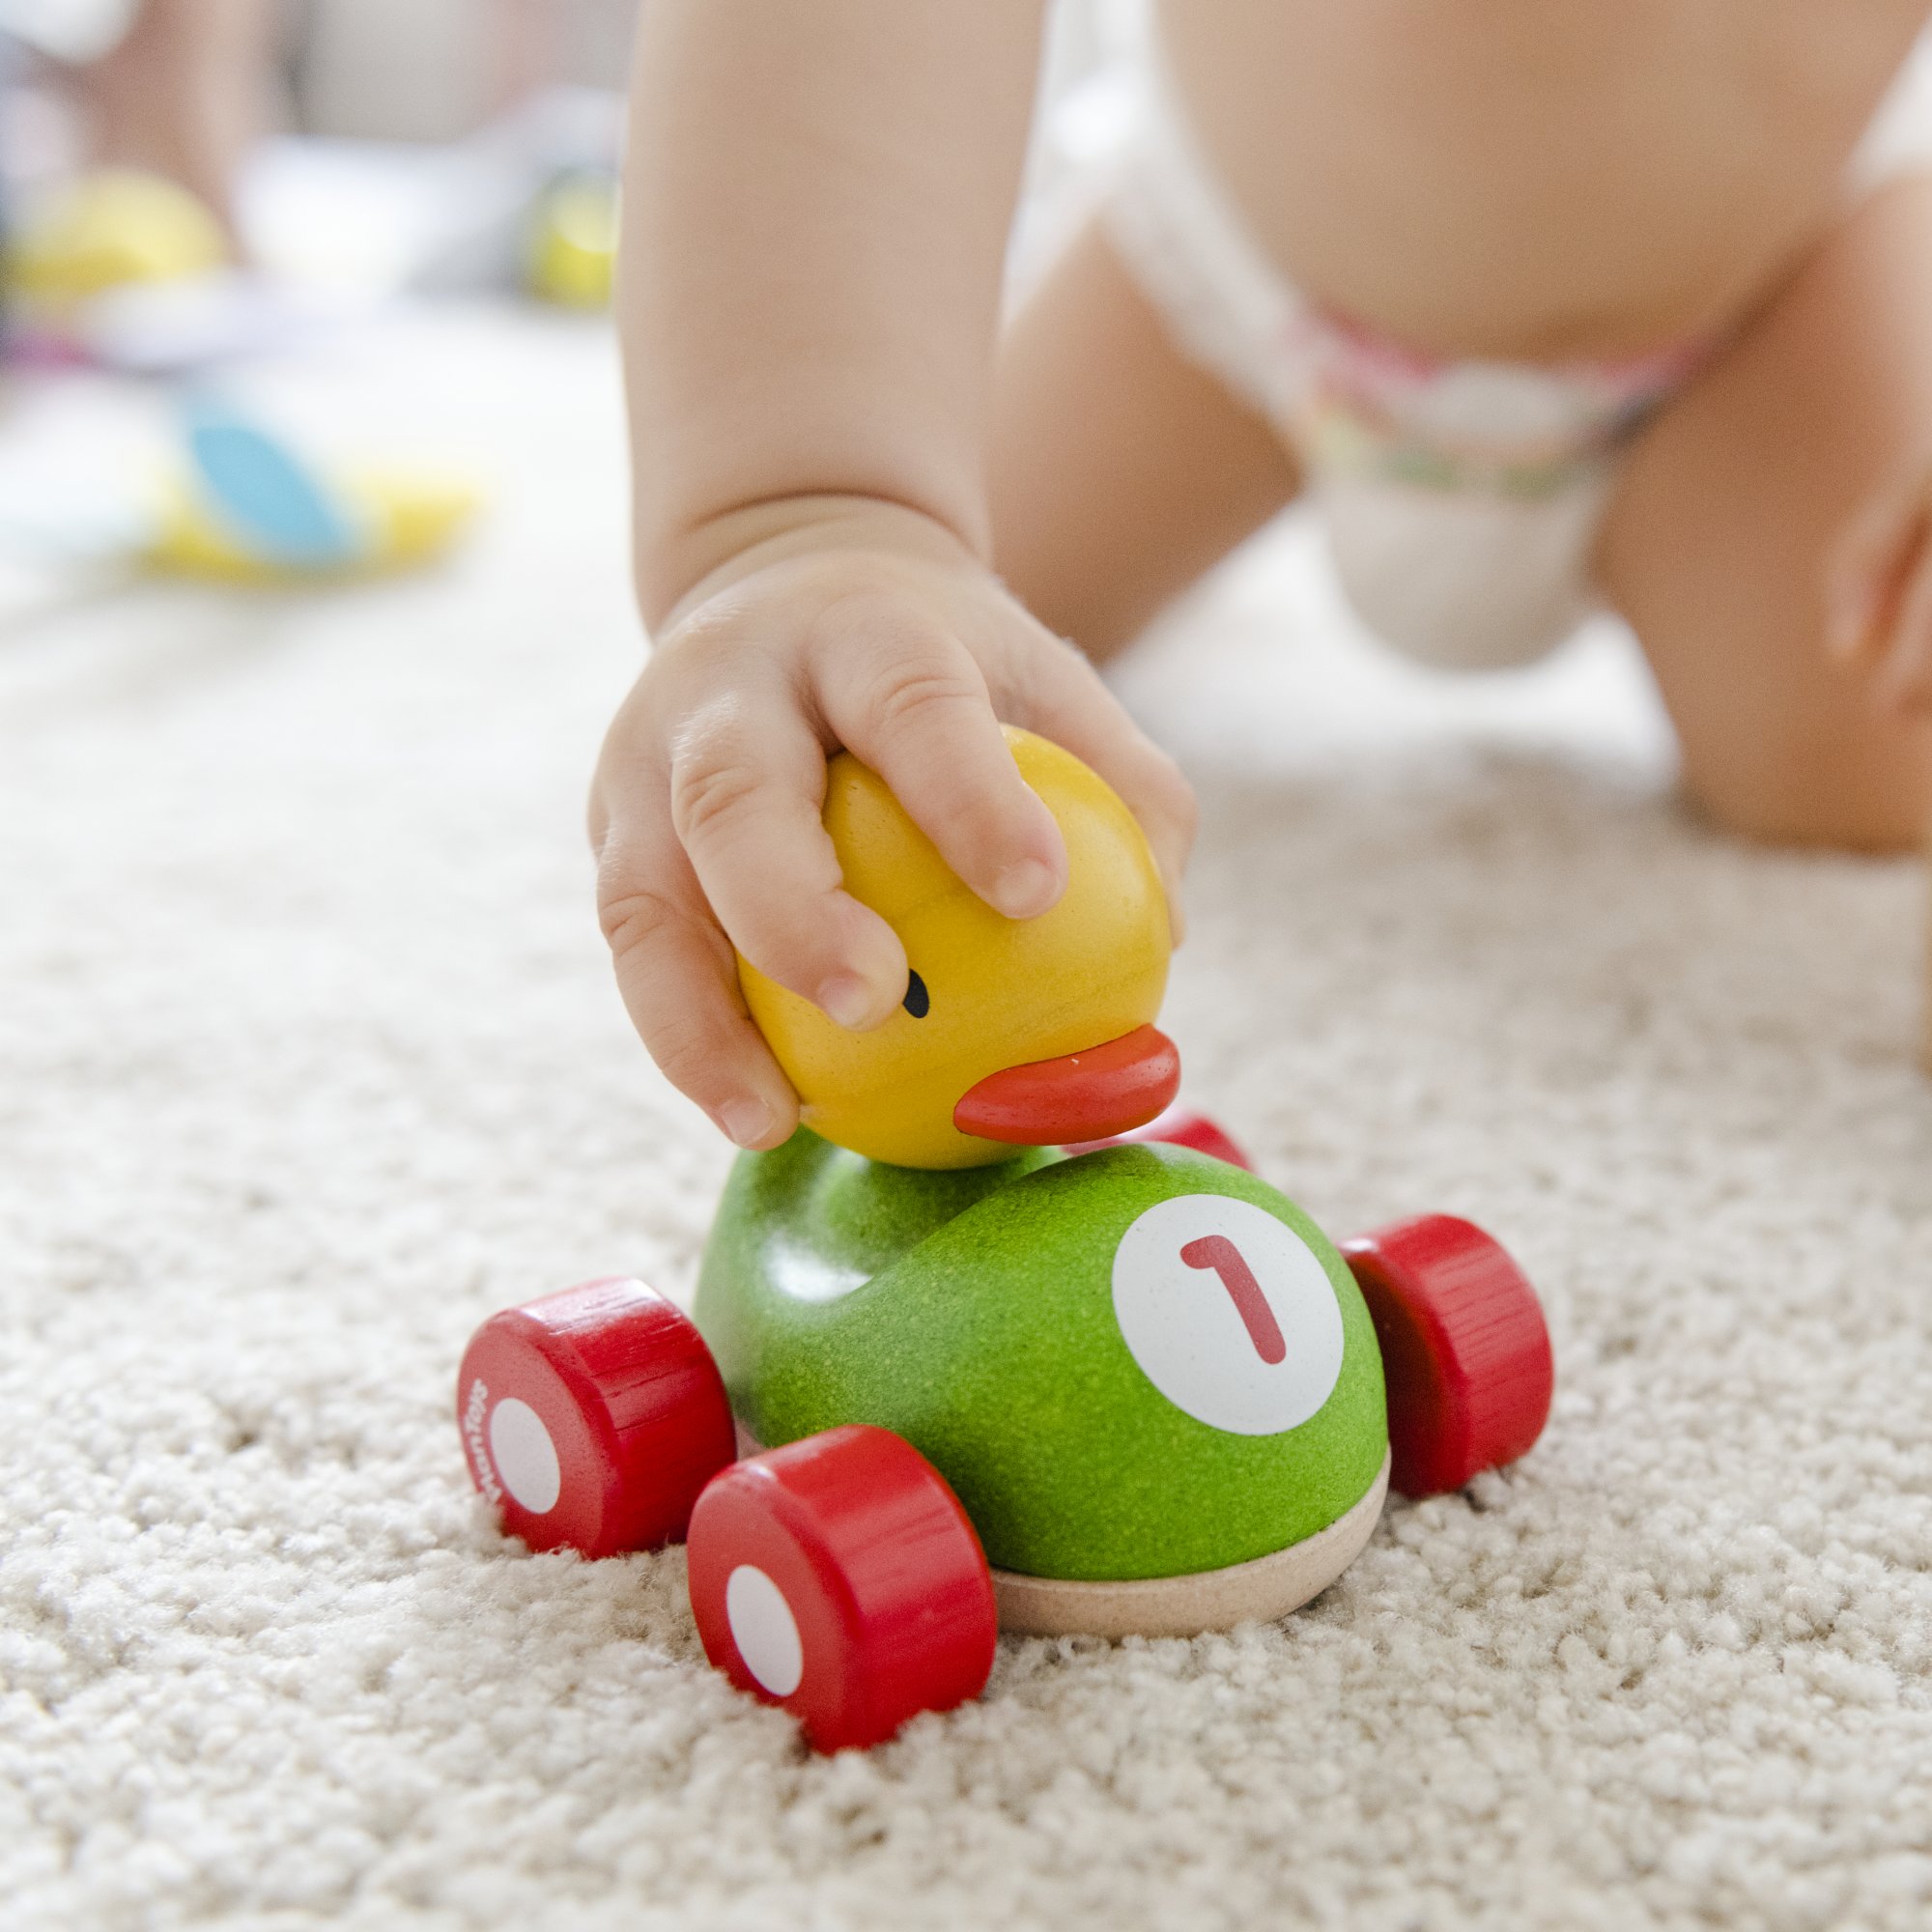 baby-playing-with-wooden-car